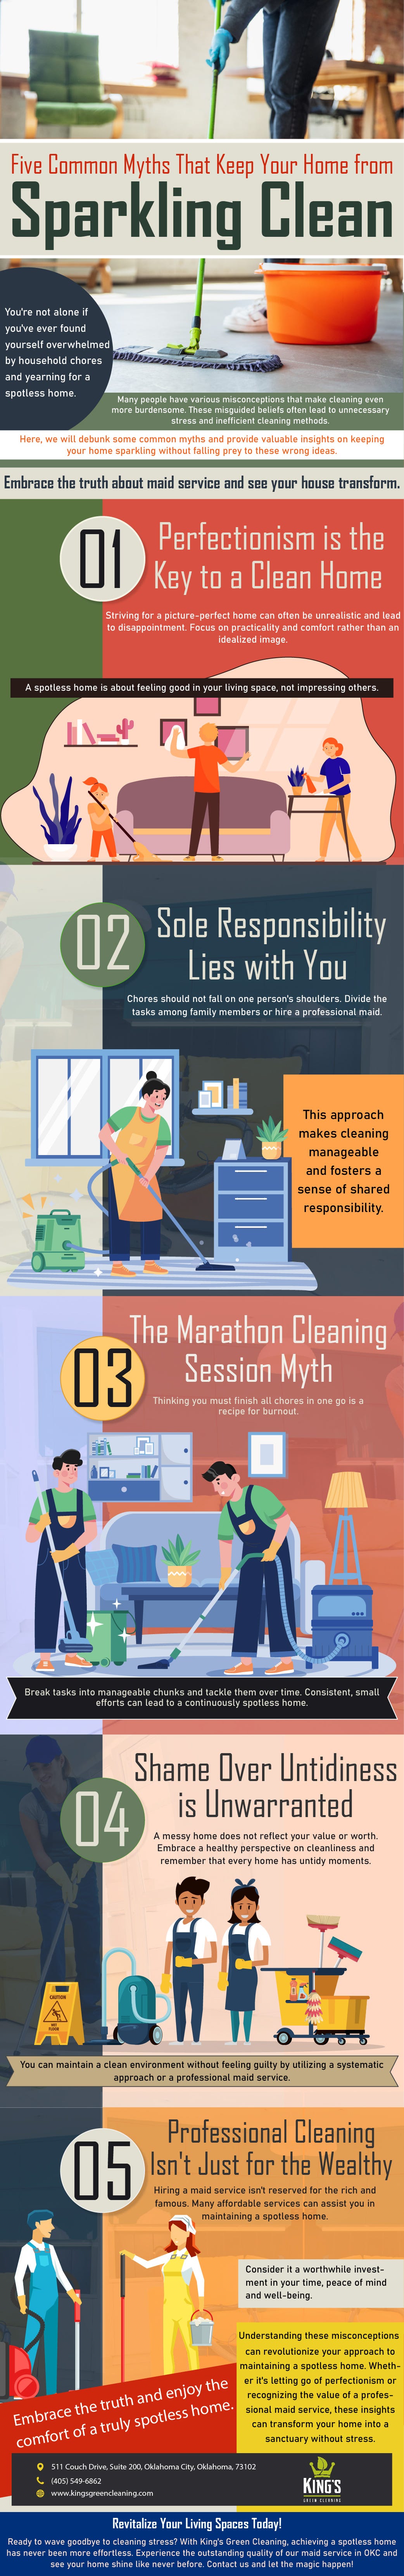 Top Myths About Couch Cleaner Services